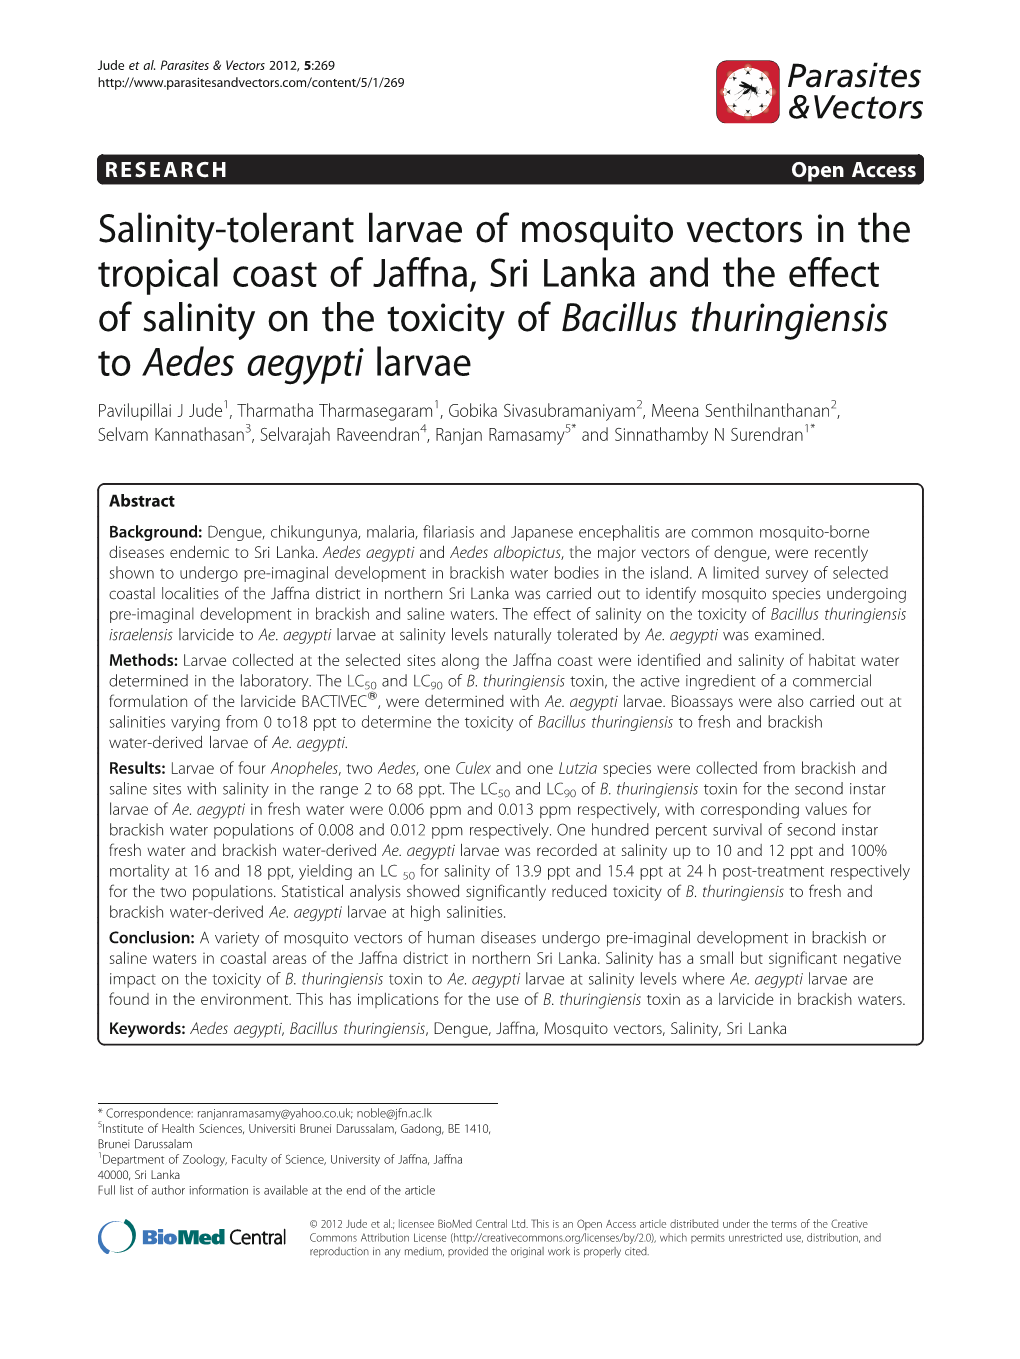 Salinity-Tolerant Larvae of Mosquito Vectors in the Tropical Coast Of